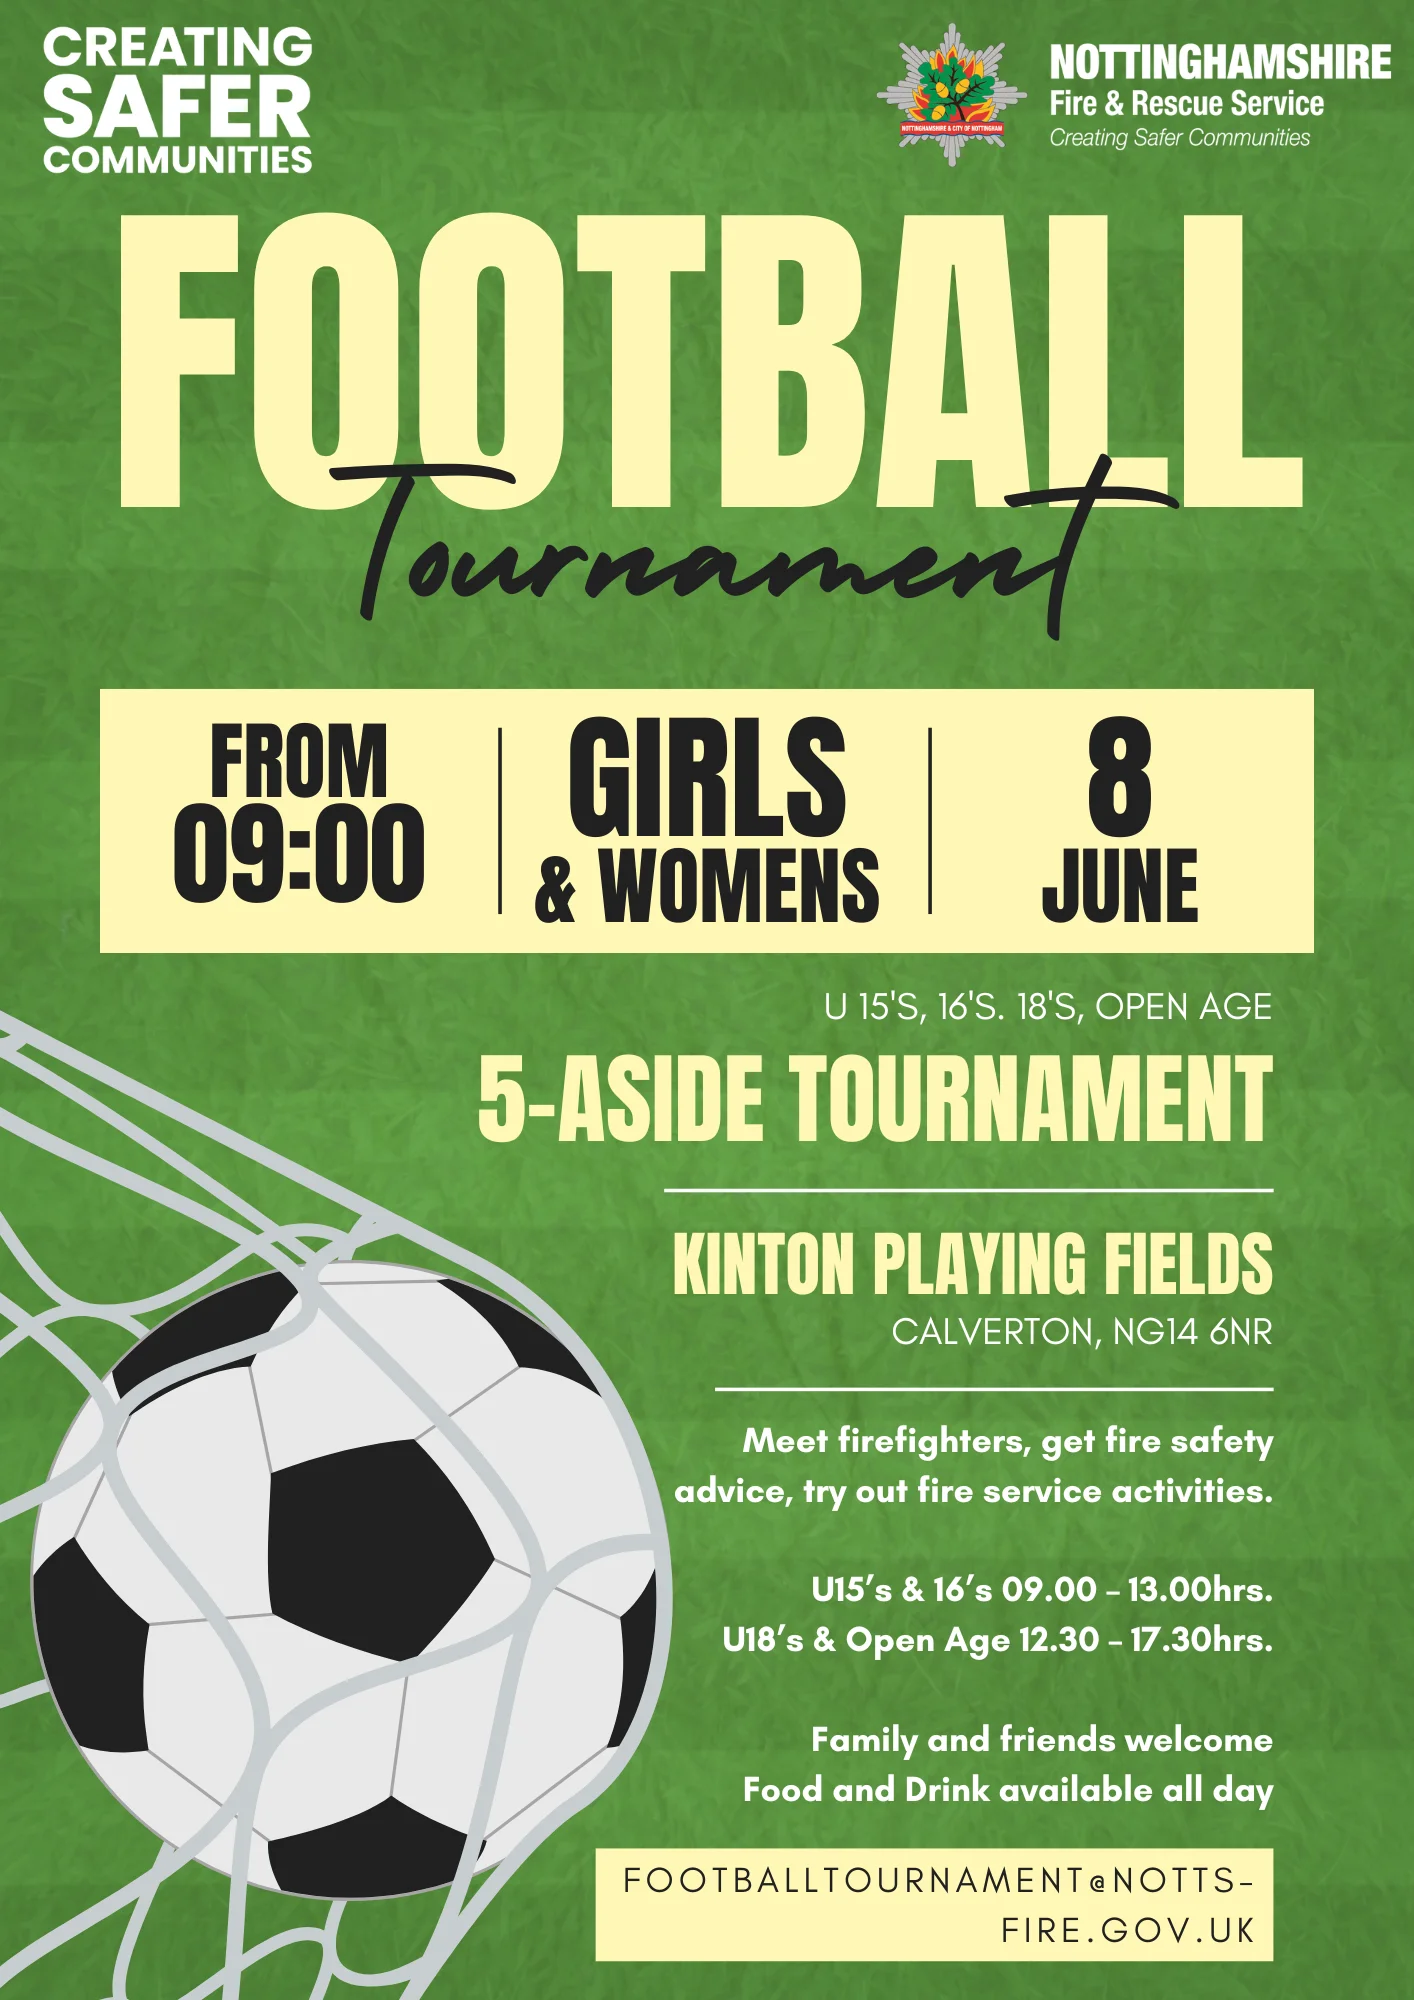 flyer with information about a football tournament. heading reads 'football tournament from 0900, girls and women's, 8 june'